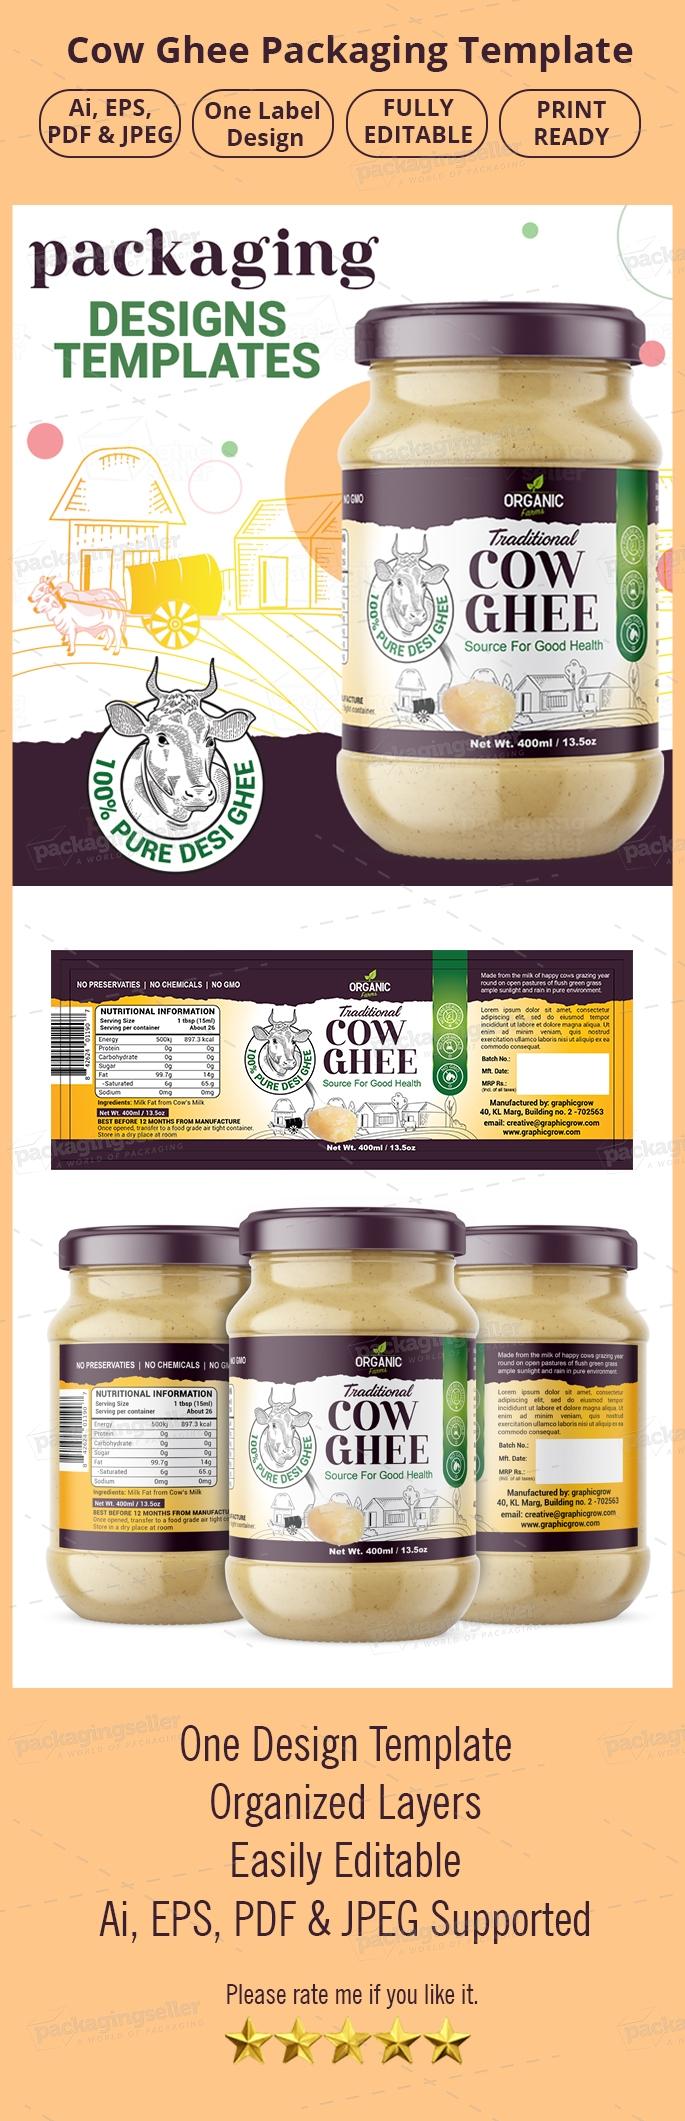 Here we offer a range of professionally designed Cow ghee label design template to help your product